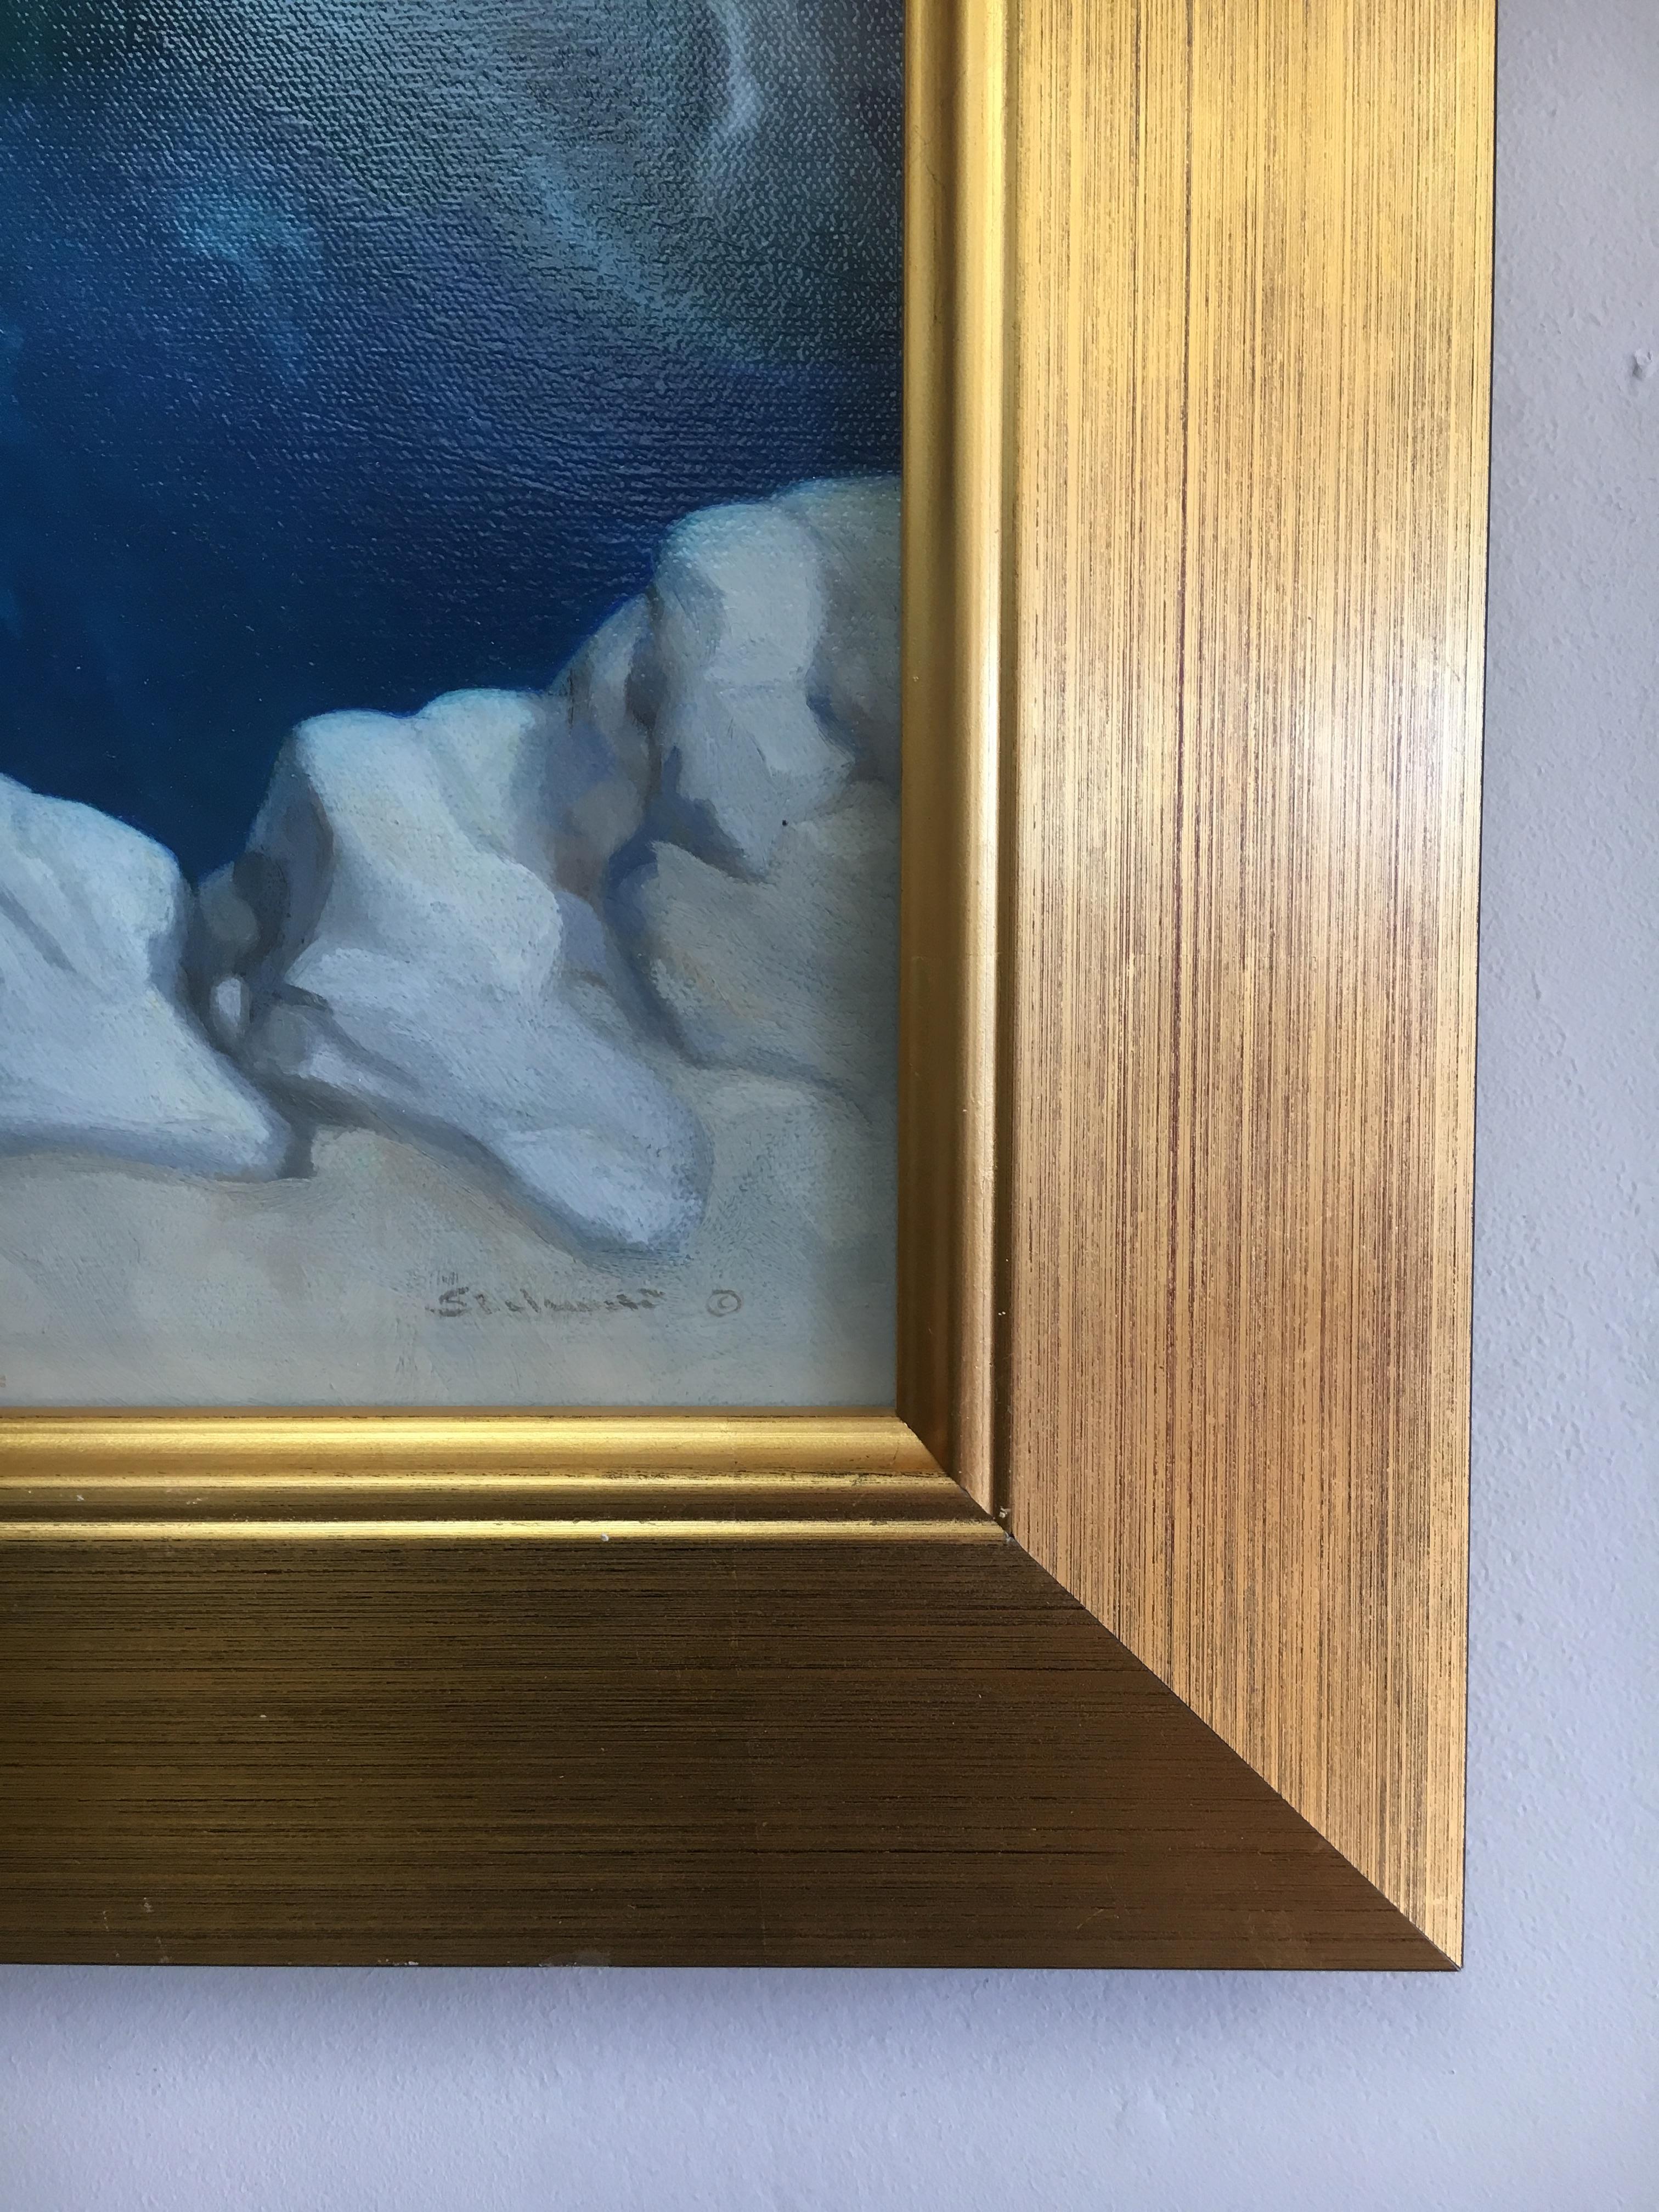 Perched upon regally blue, crystal clear ocean waters, the depths of the reef below beckons to be explored and admired. The incredible skills of Croatian American artist Rinaldo Skalamera bring intrigue and wonder to his realist contemporary